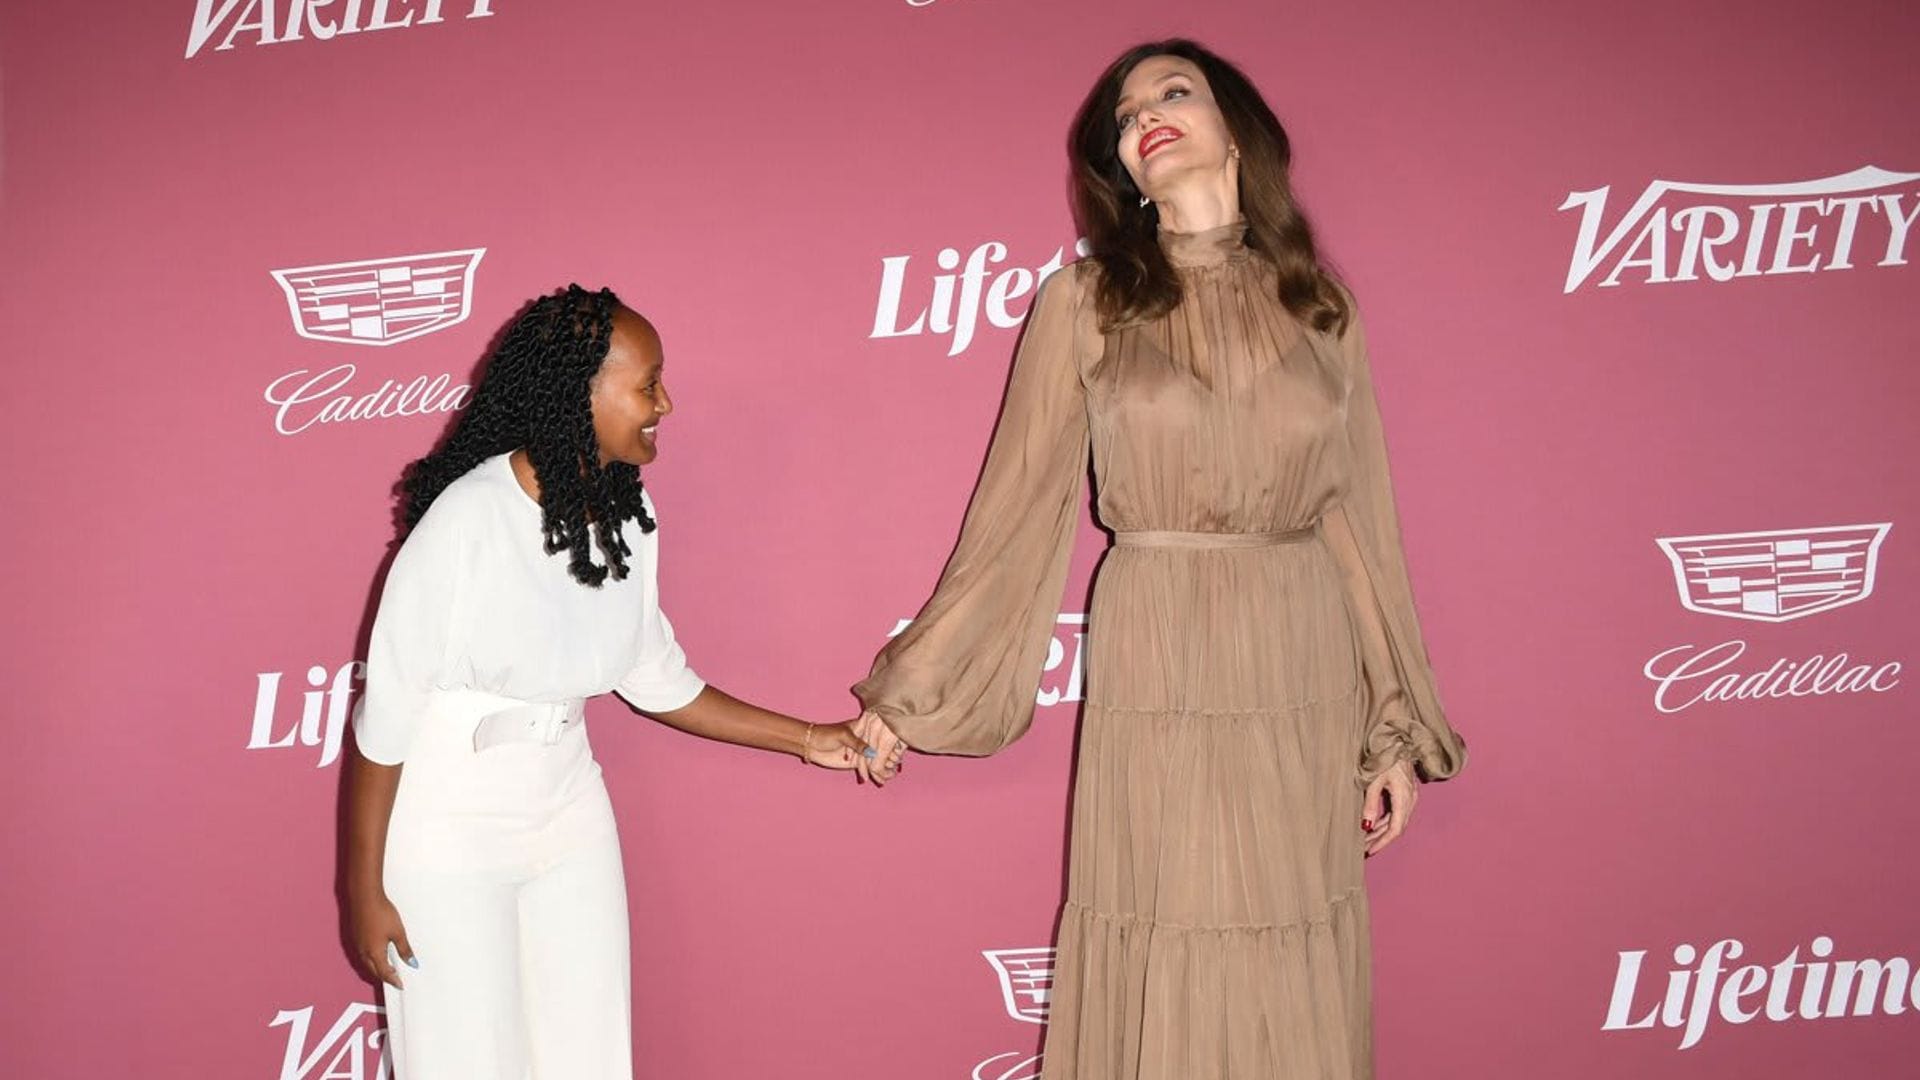 Angelina Jolie and her daughter Zahara adorably posed on a red carpet together